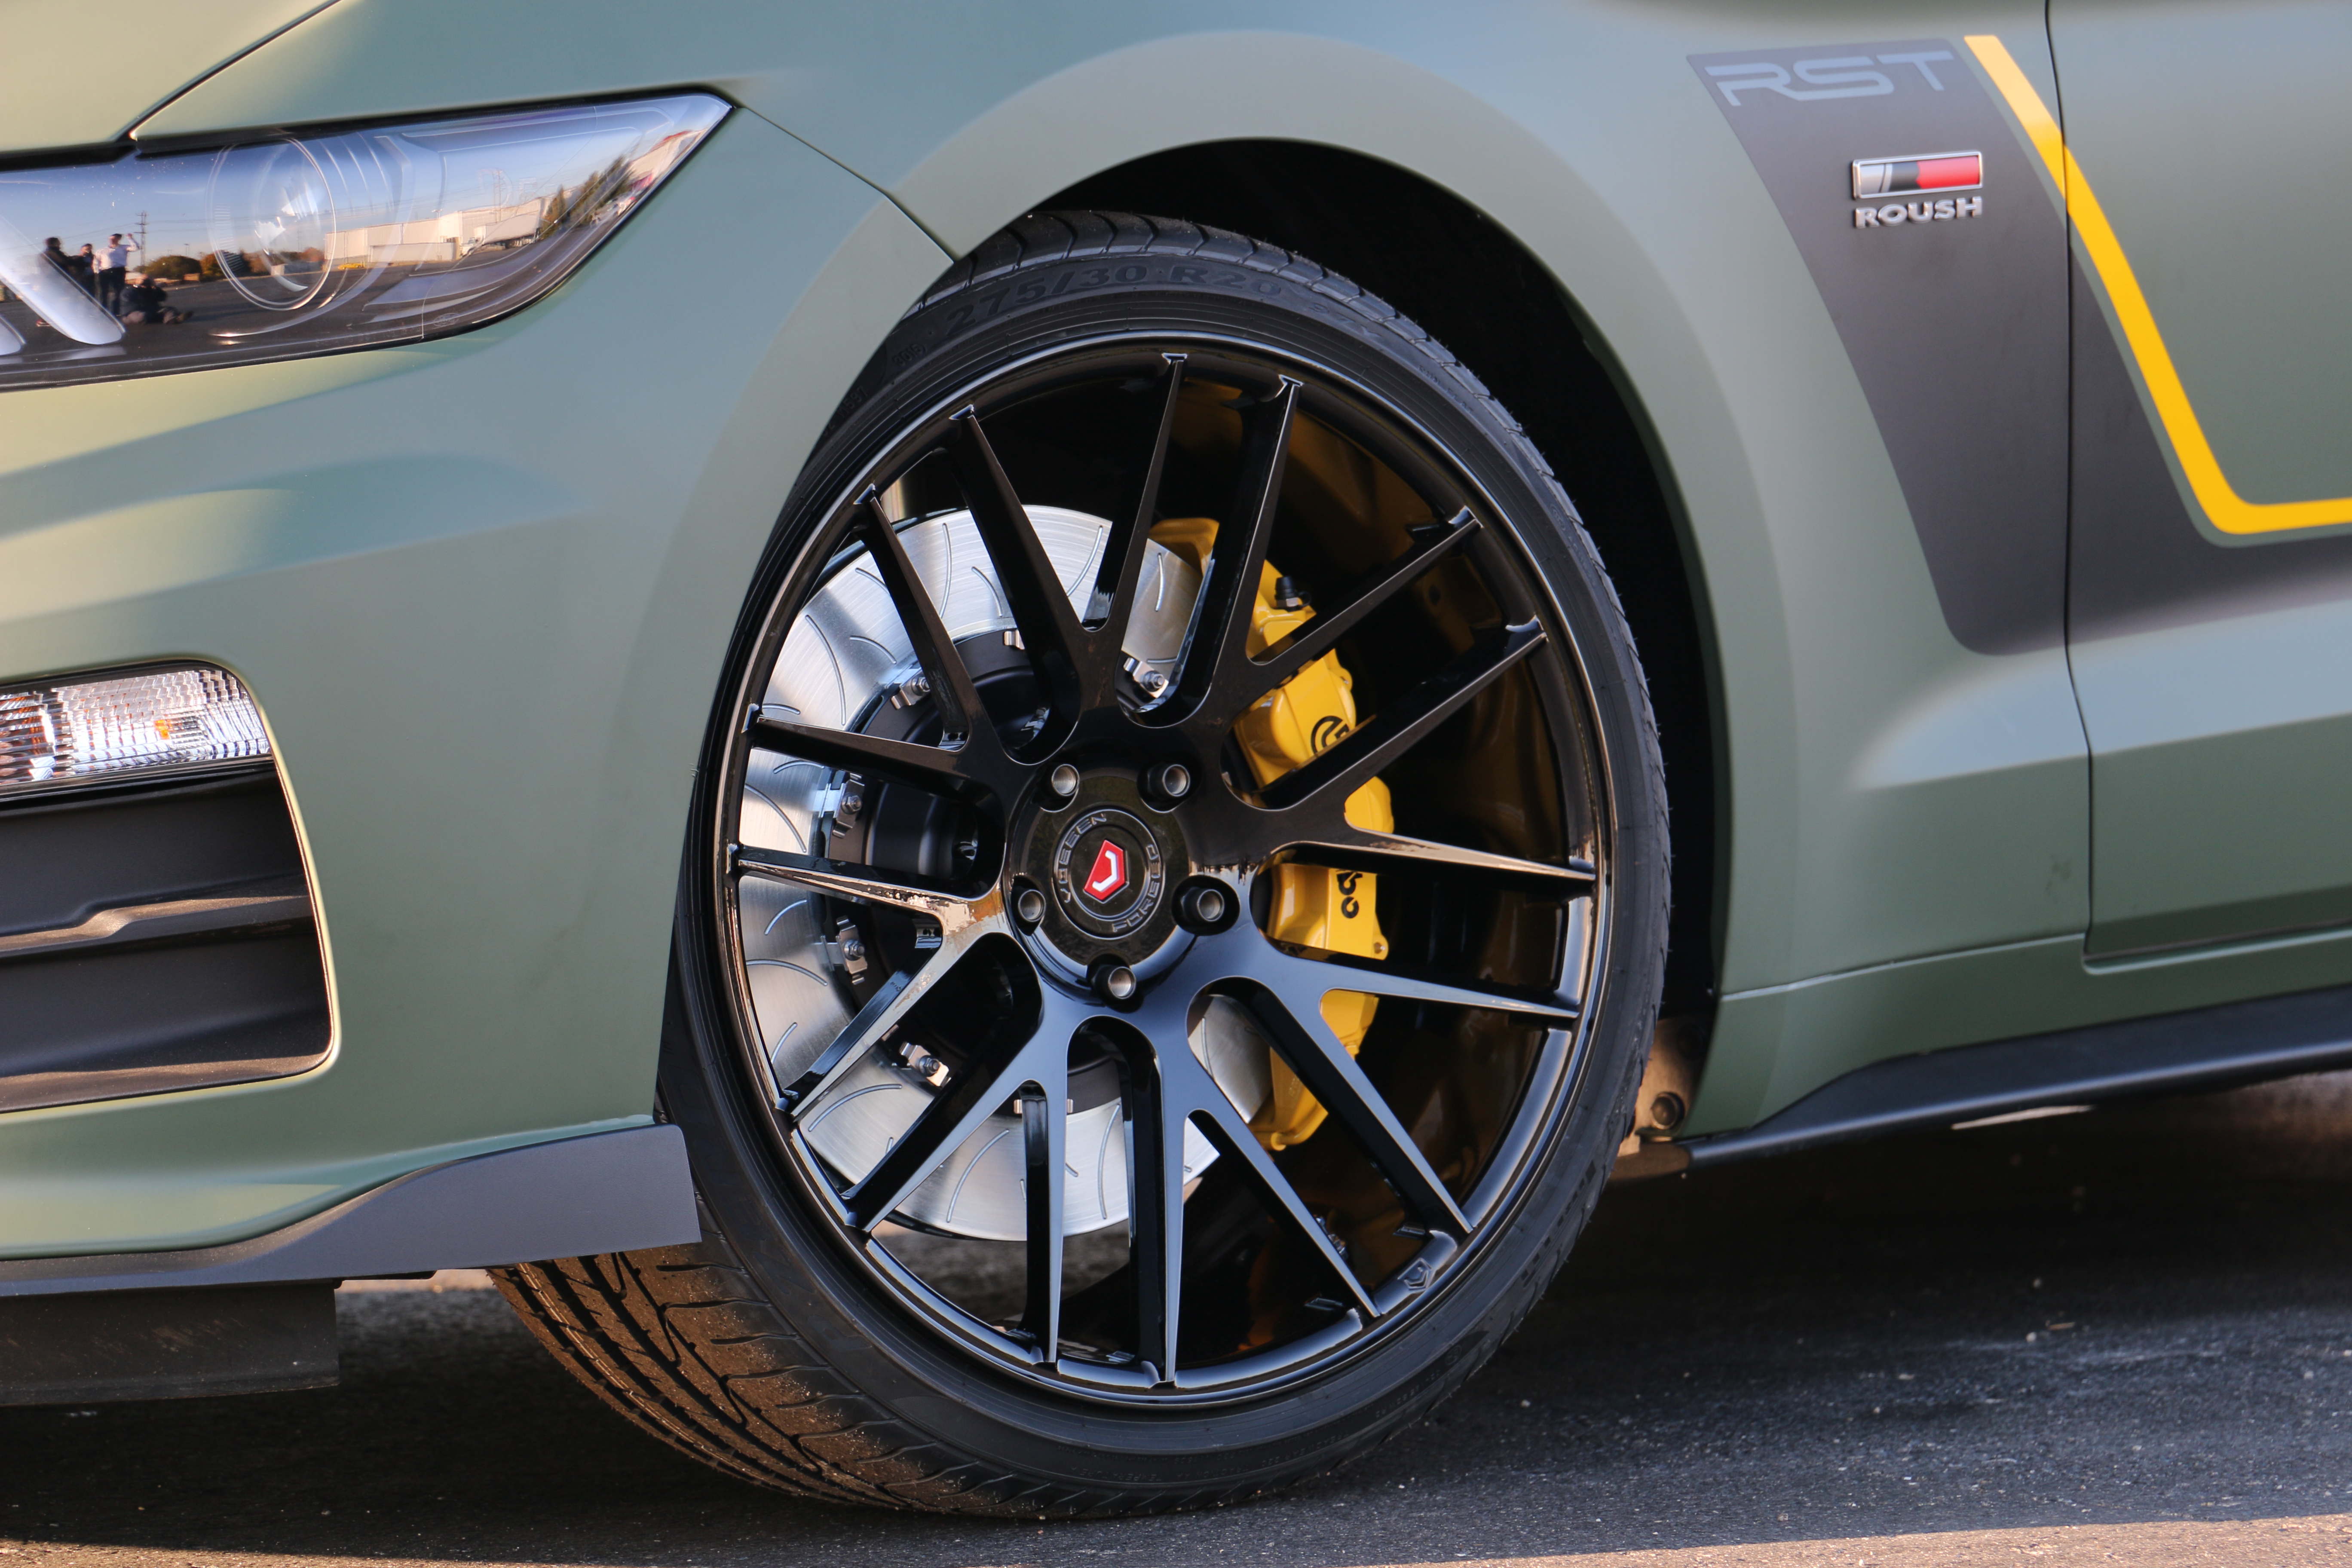 The ROUSH Turbocharger takes the 2016 EcoBoost Mustang to 511 horsepower, 465 lb-ft torque.